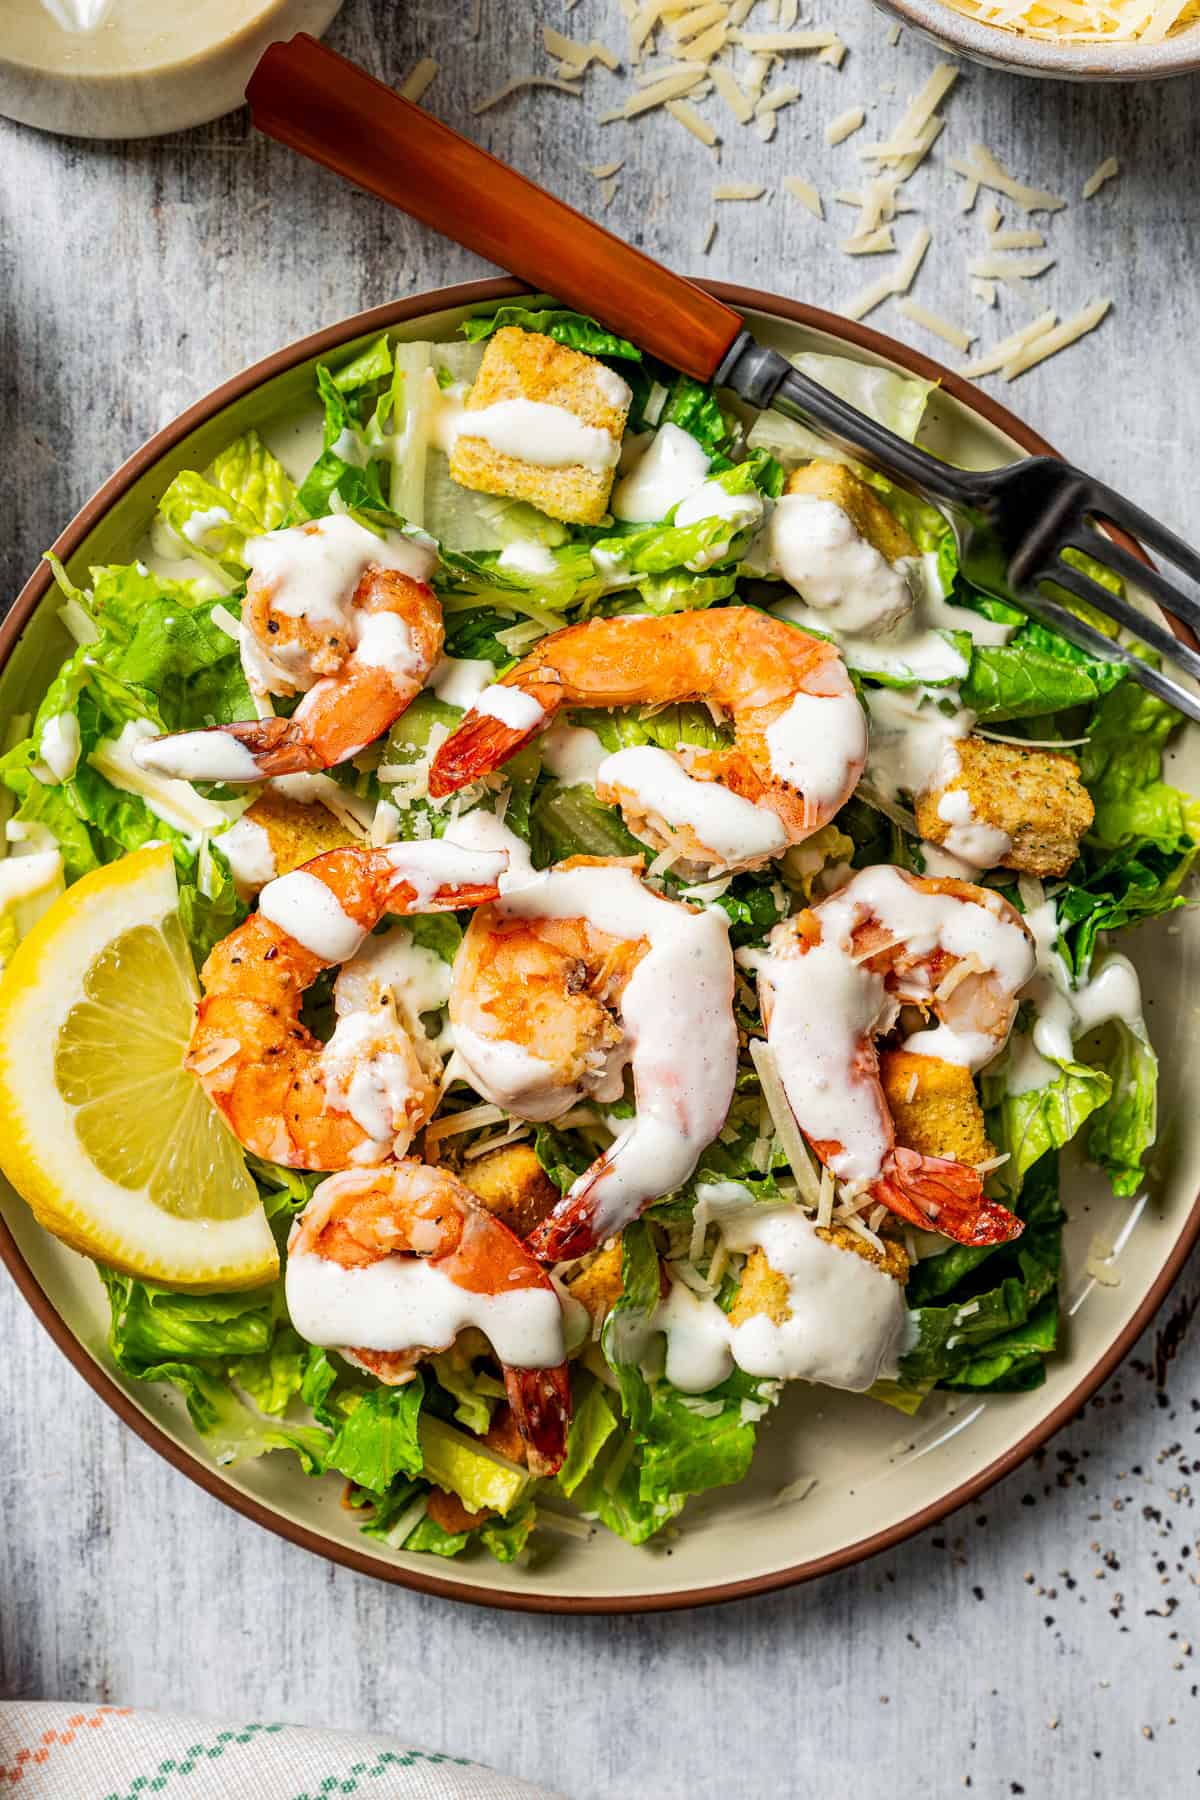 Caesar salad topped with grilled shrimp and a drizzle of dressing, garnished with a lemon wedge on a plate.